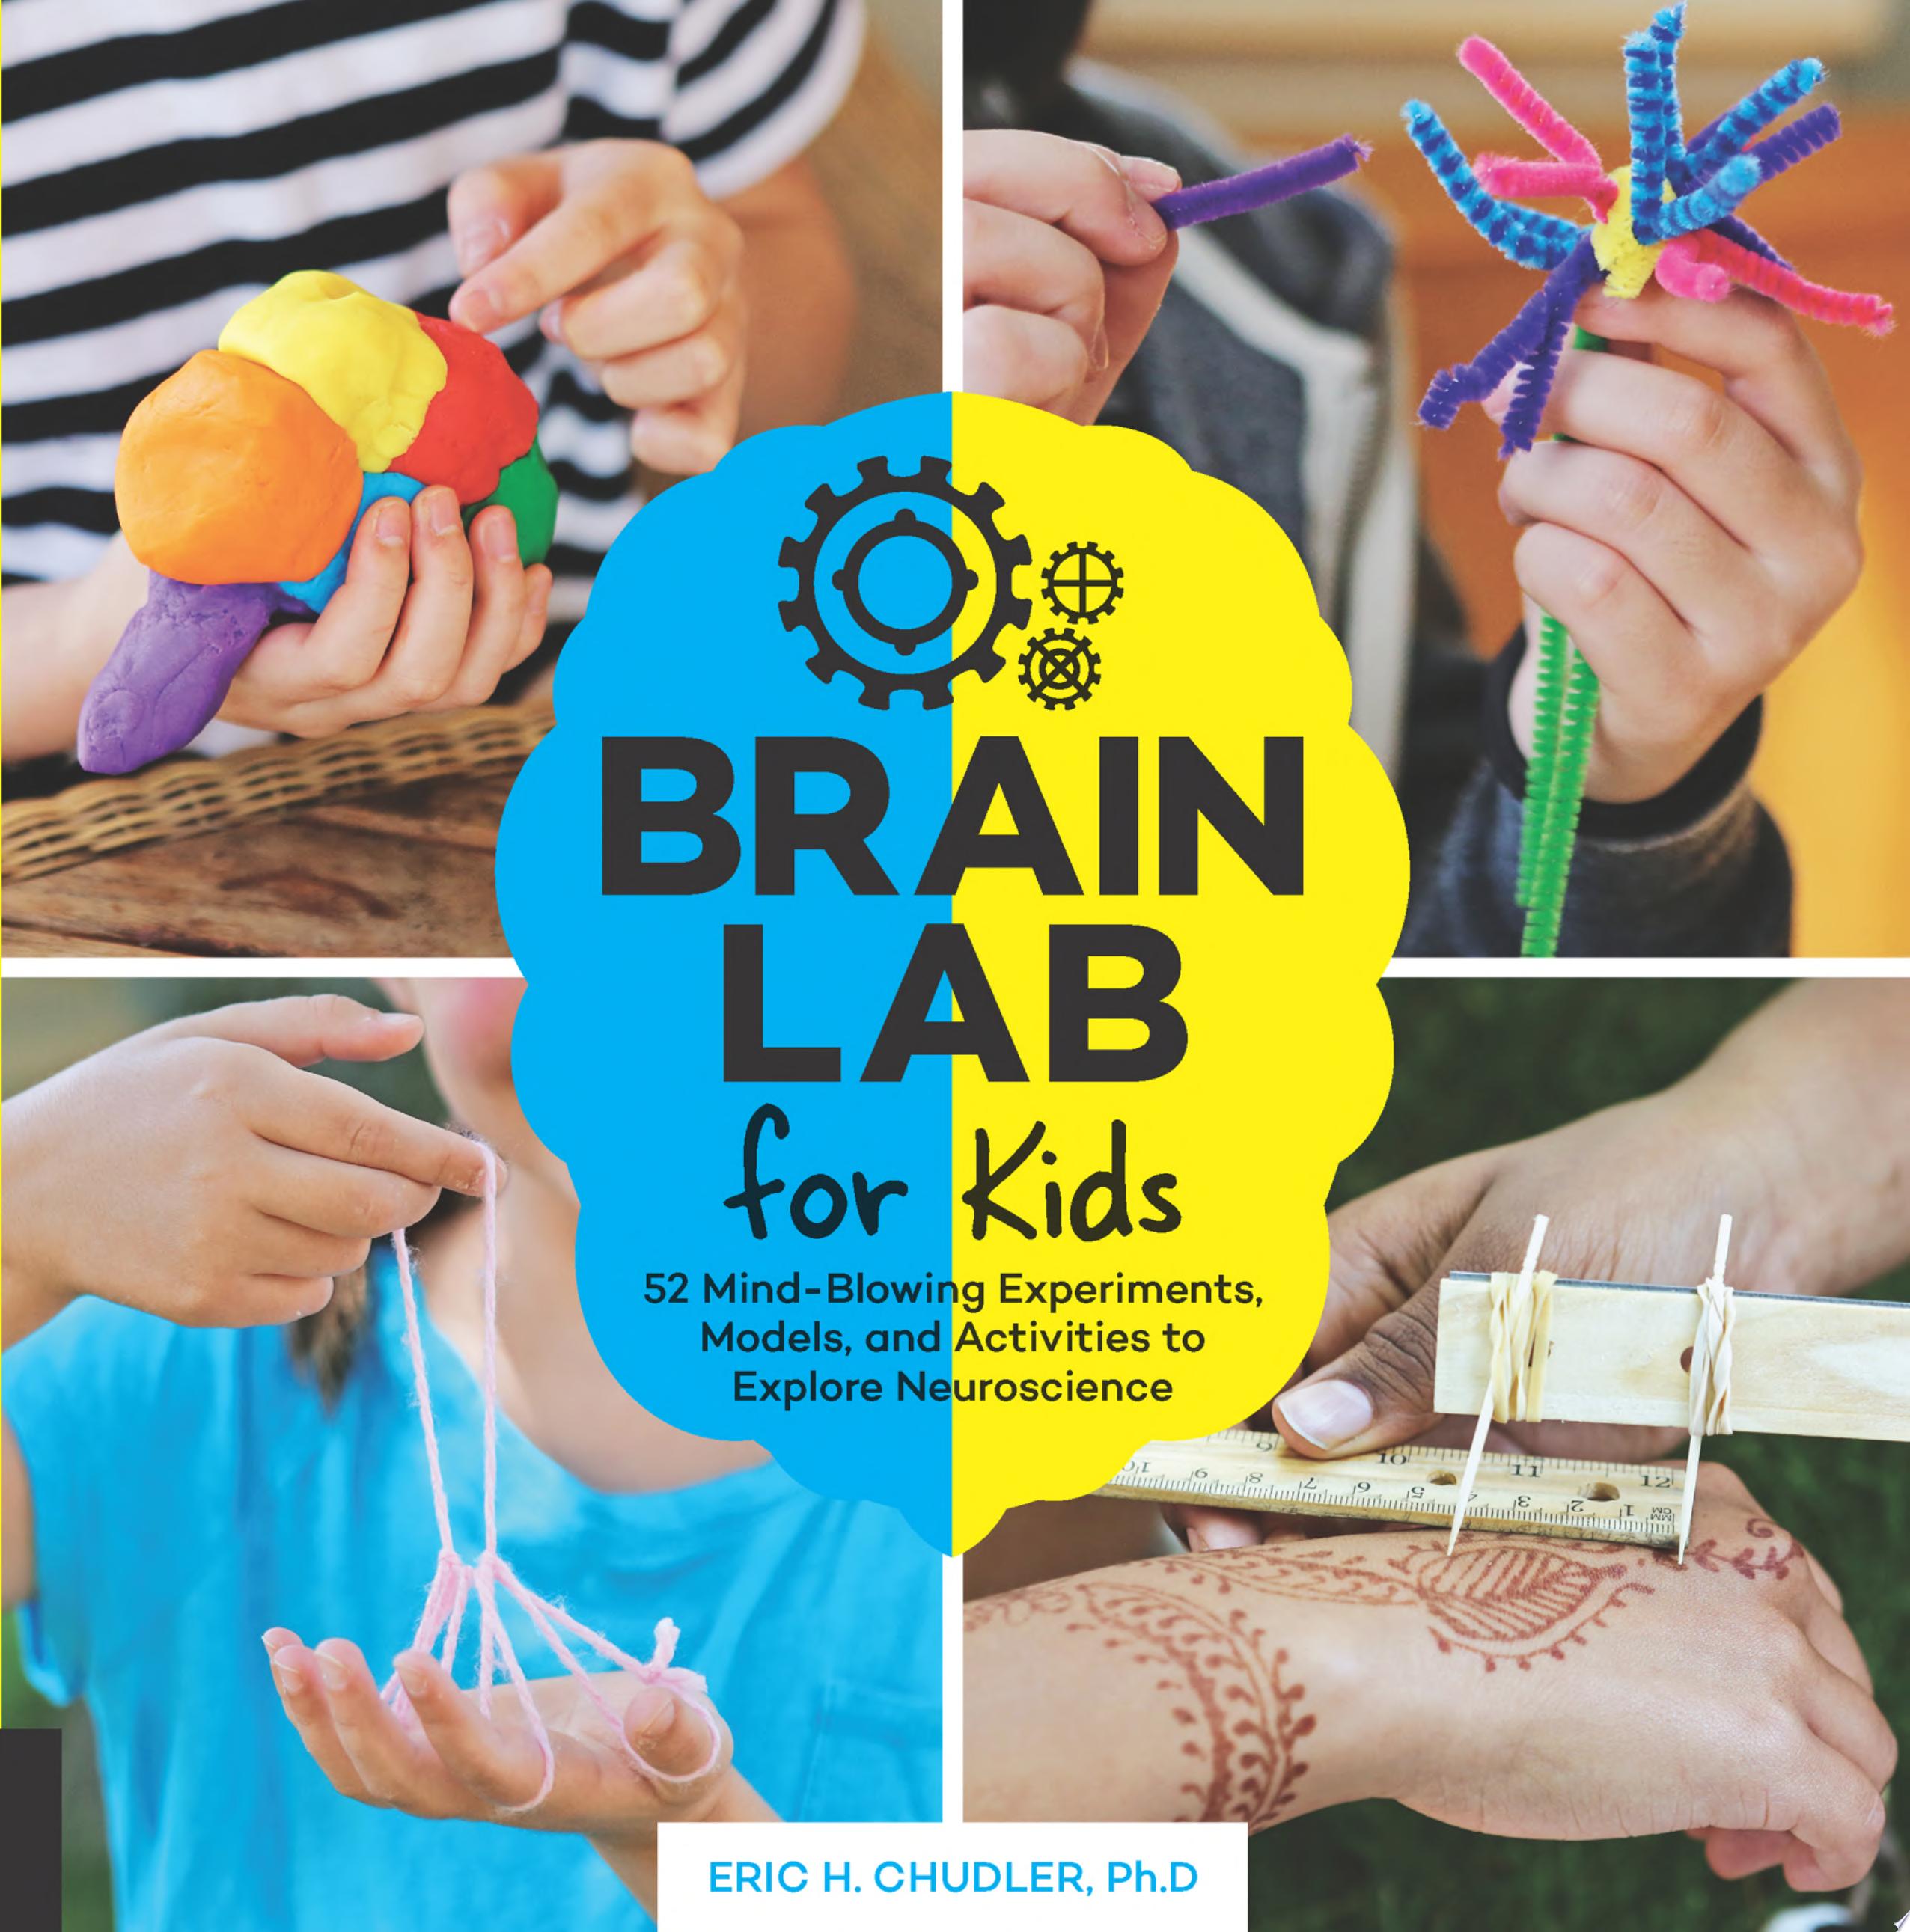 Image for "Brain Lab for Kids"